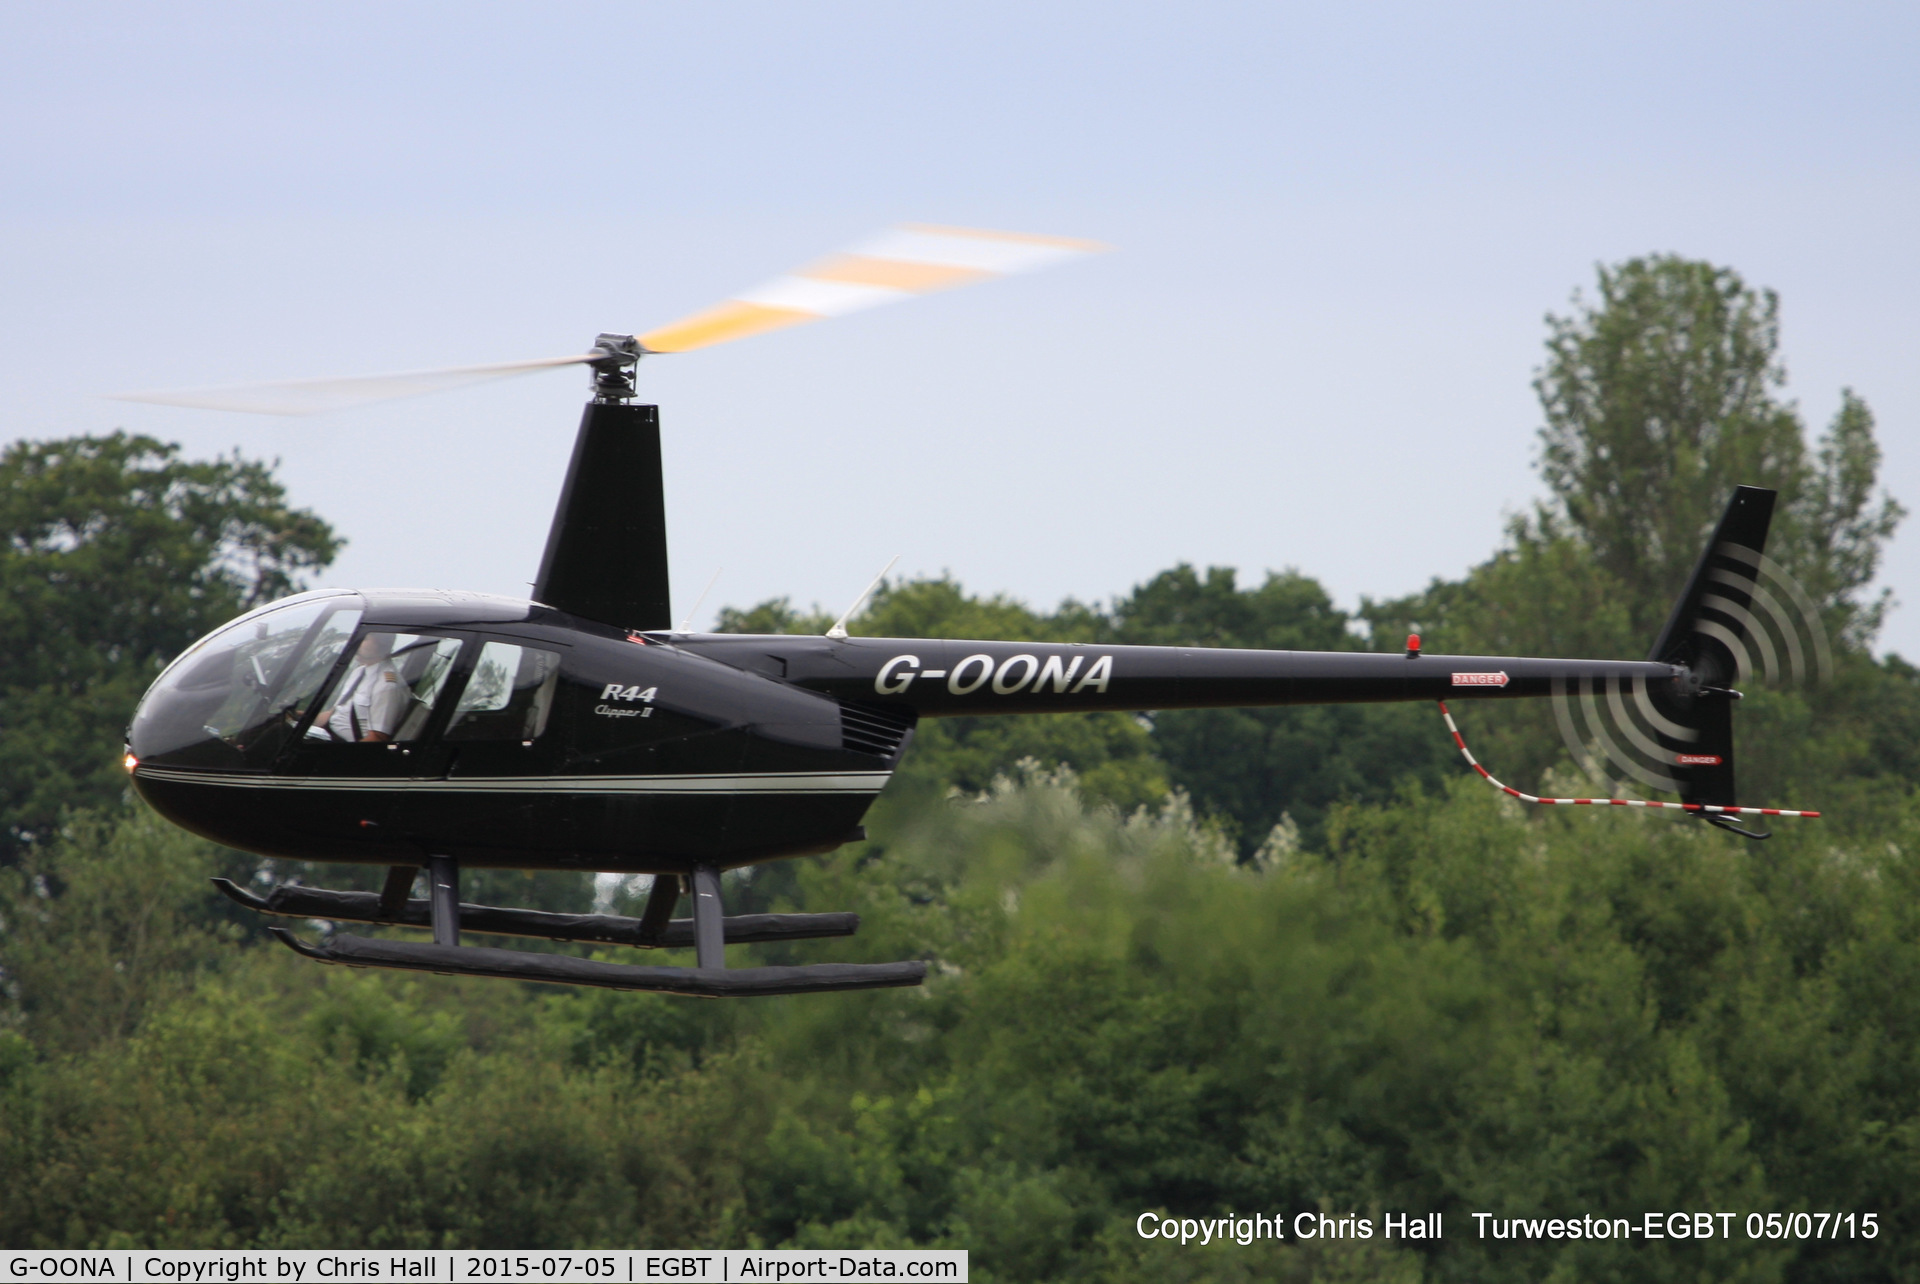 G-OONA, 2005 Robinson R44 Clipper II C/N 10907, ferrying race fans to the British F1 Grand Prix at Silverstone